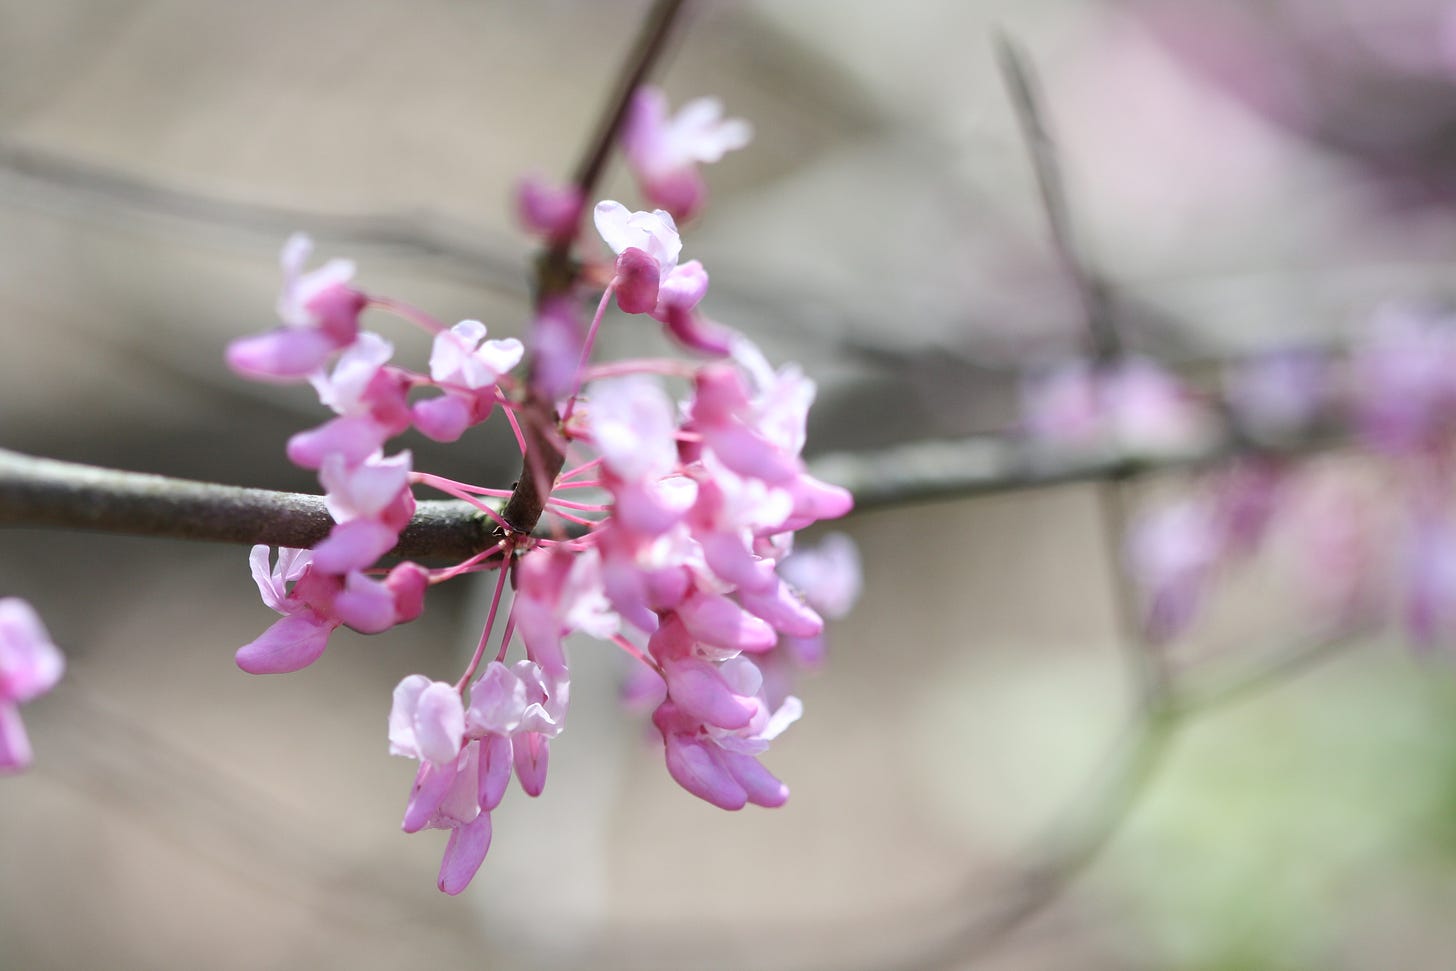 a cluster of pinky purple redbud blossoms on a branch